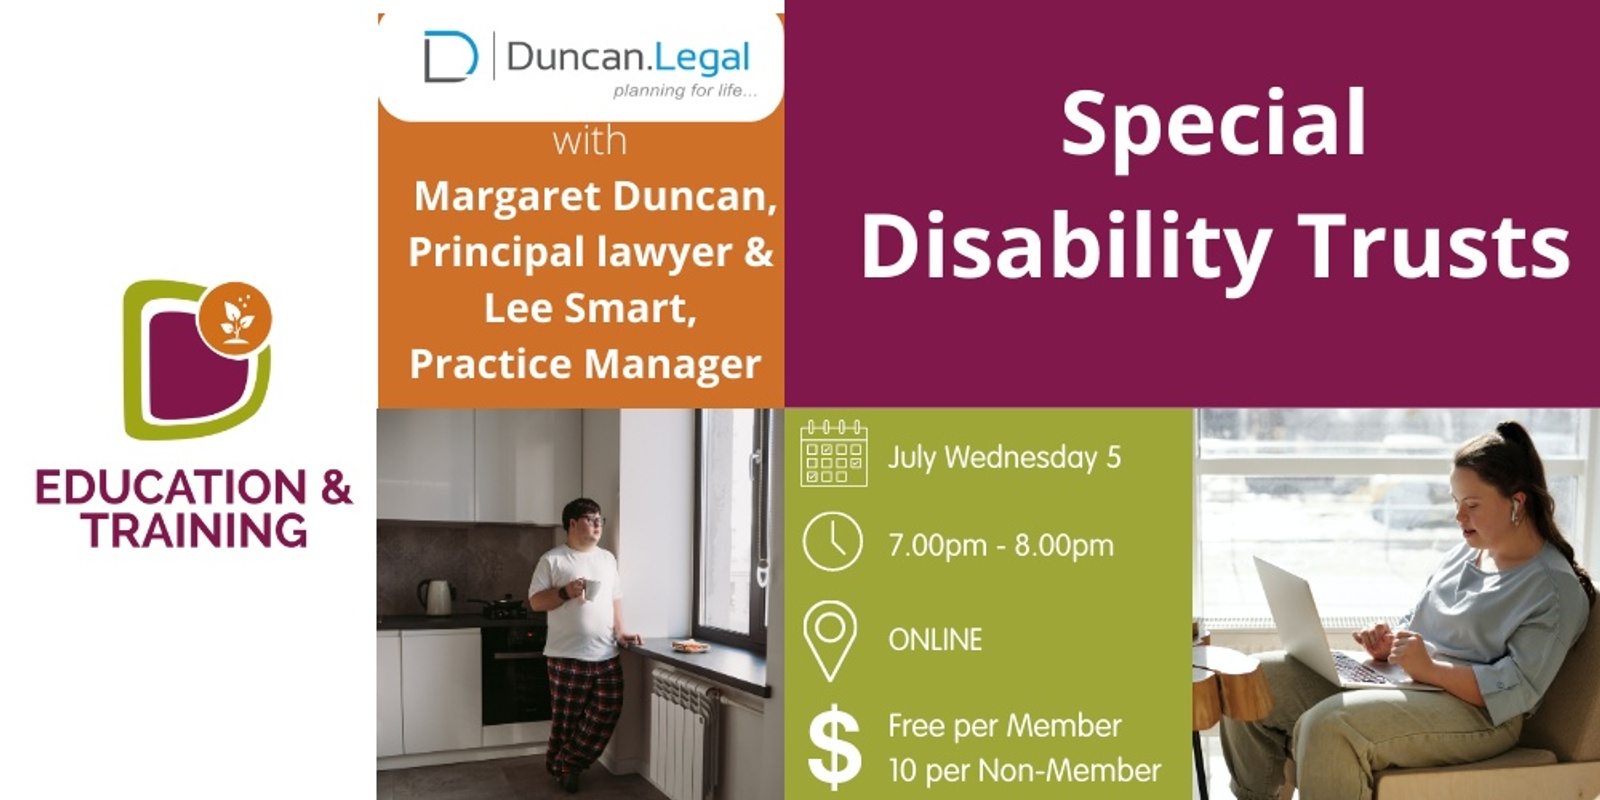 DSNSW Special Disability Trusts with Duncan Legal